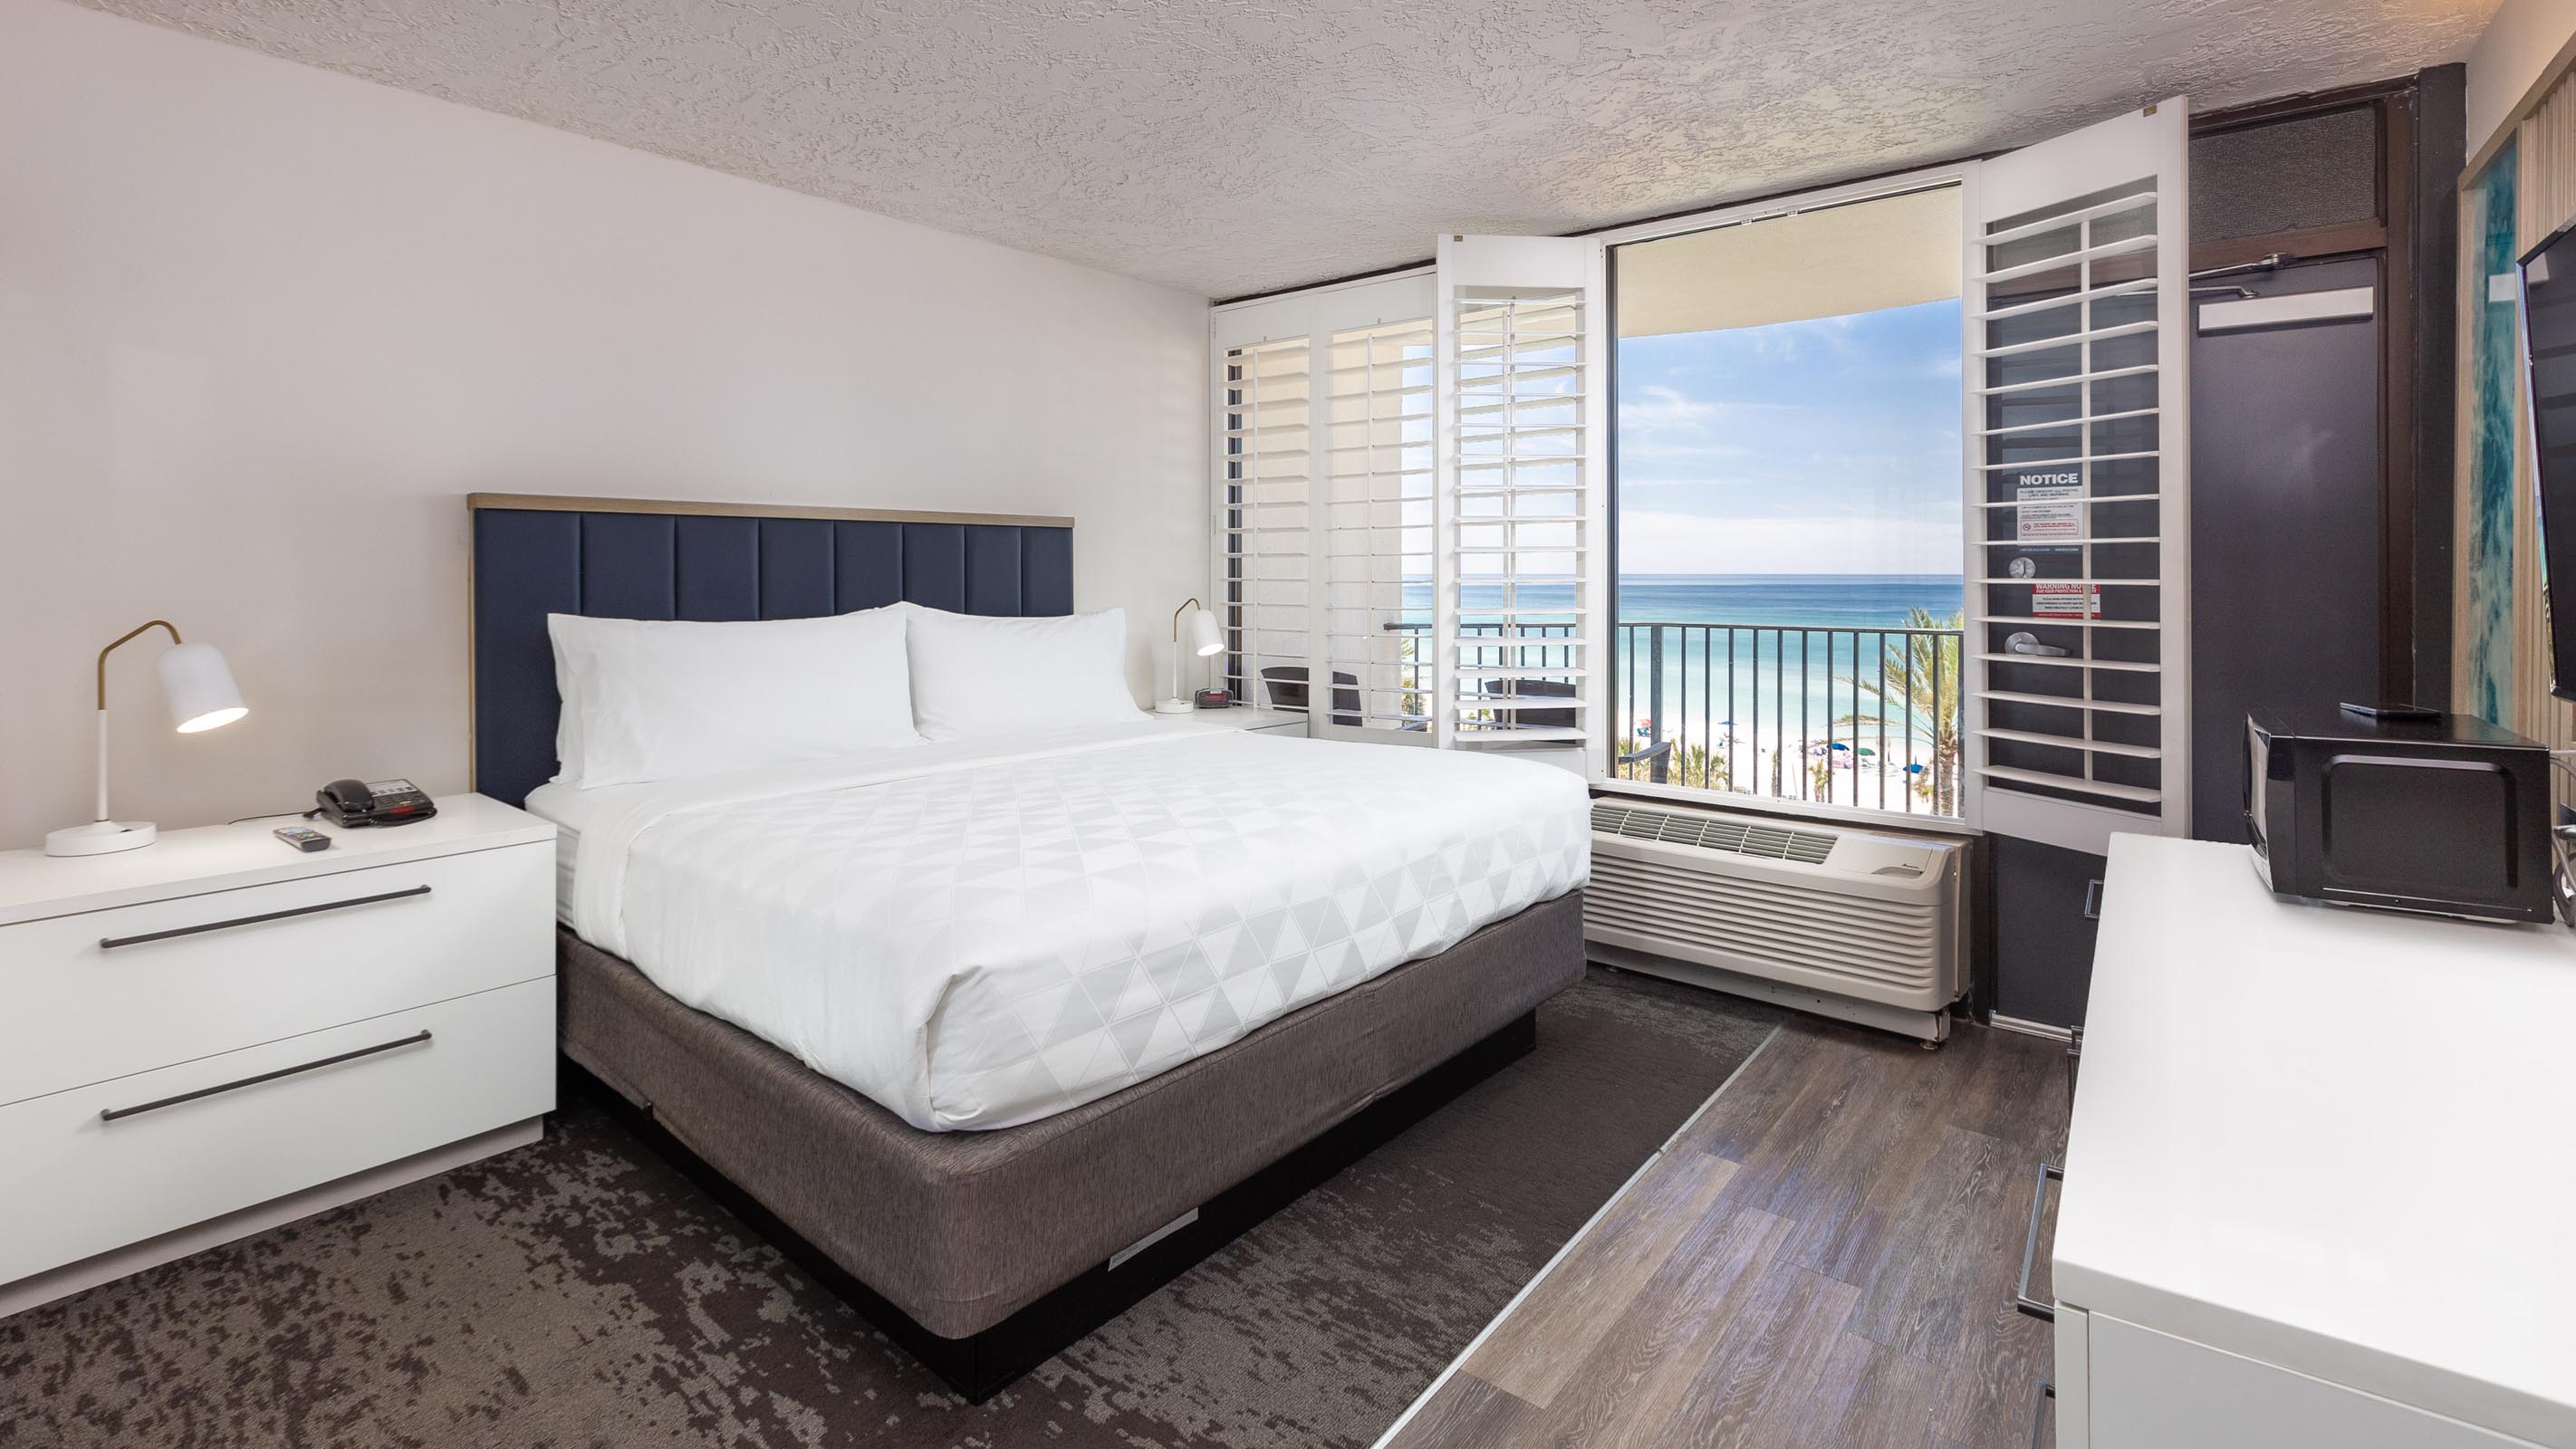 King bed with white side table and view of balcony and ocean